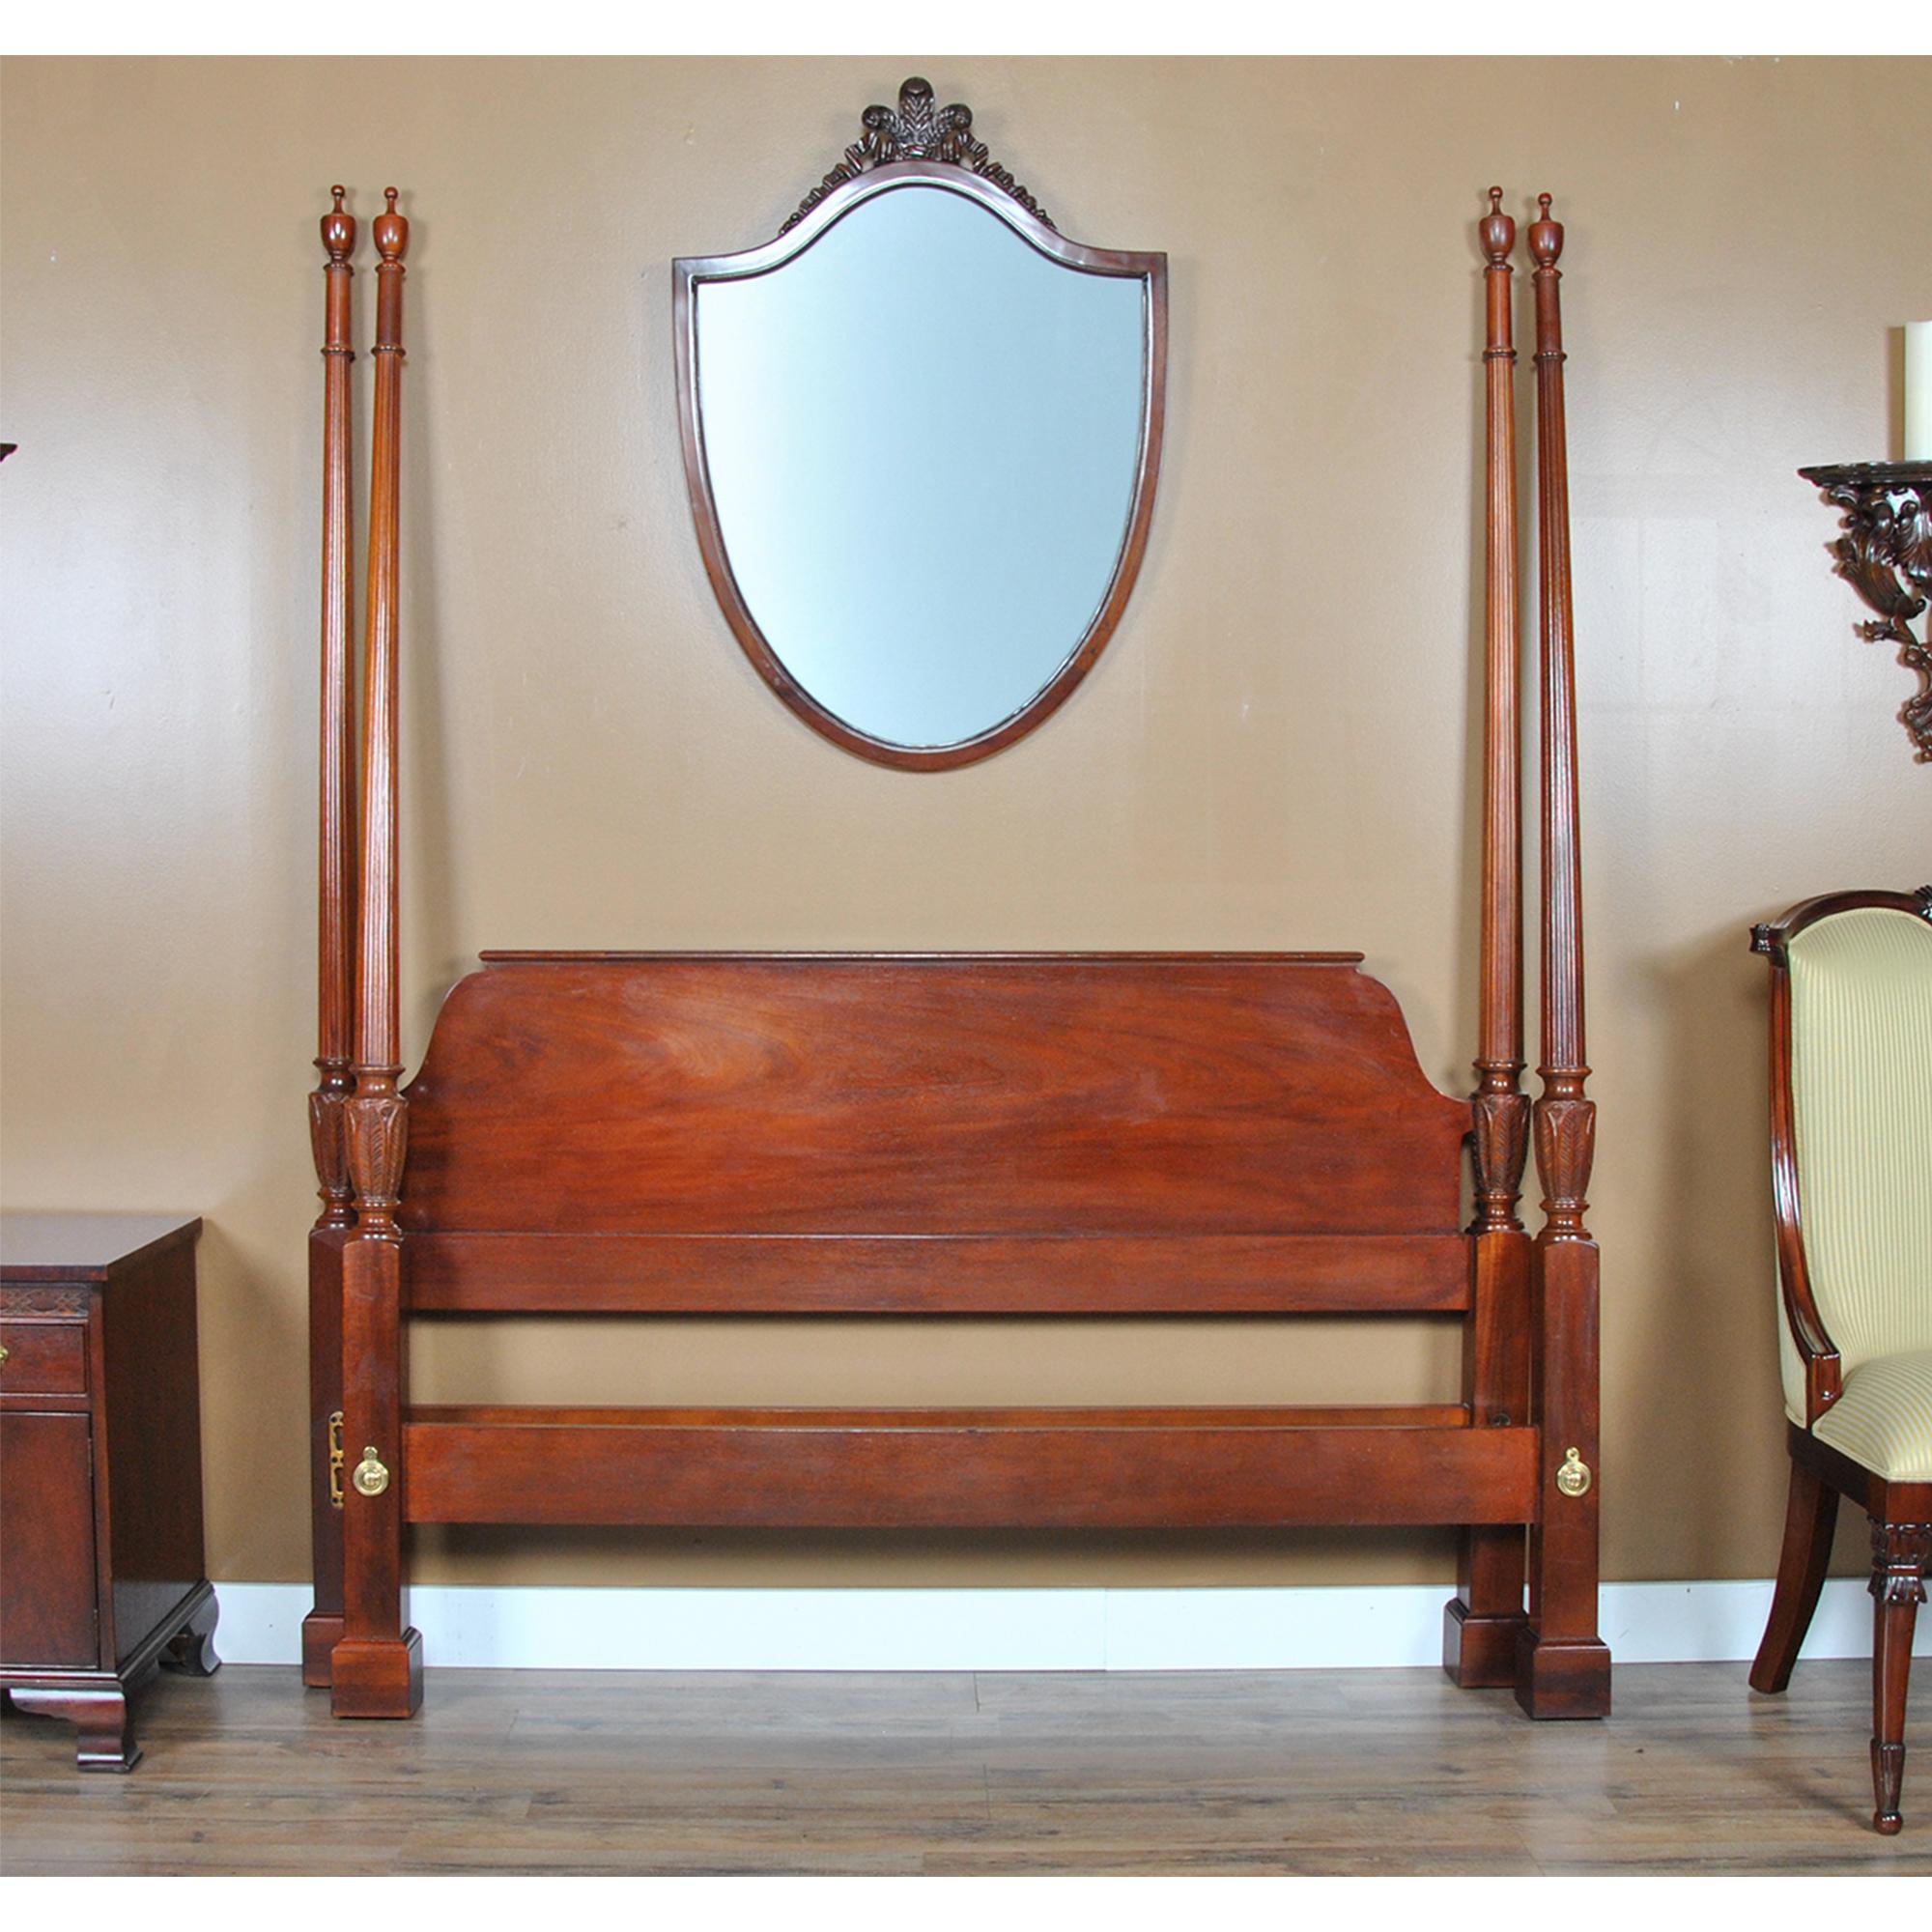 A vintage Baker Mahogany Poster Bed which will be the focal point of any bed room in which it is placed. From the beautifully tapered finials and posts all of the way down to the solid square legs this bed has a great traditional look which gives it